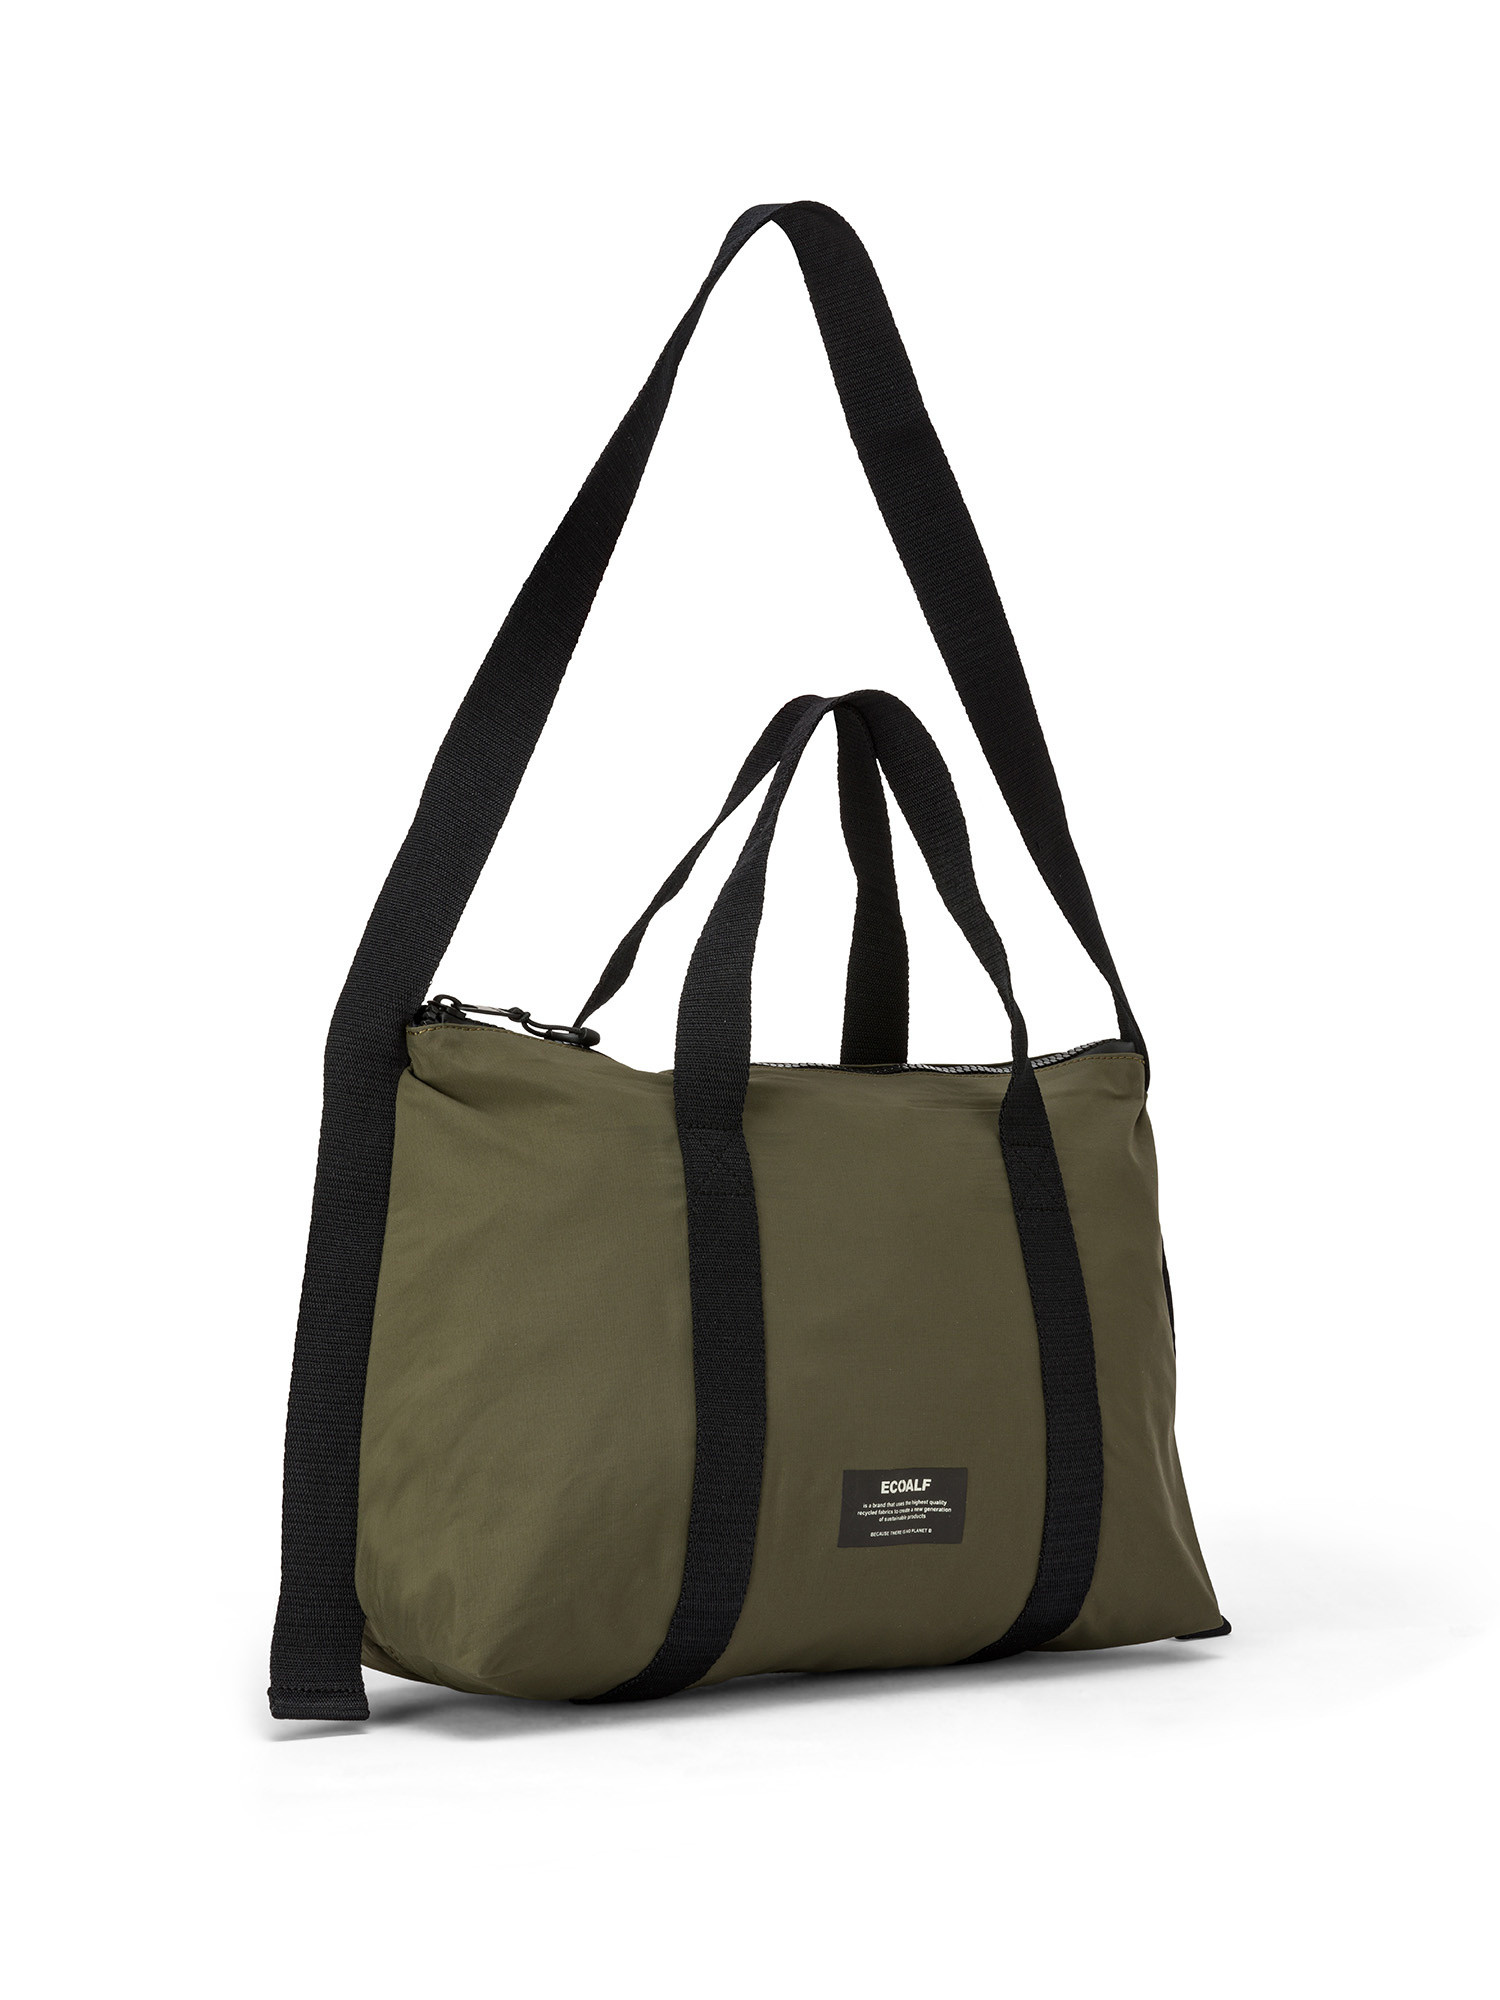 Ecoalf - Rio bag with logo, Olive Green, large image number 1